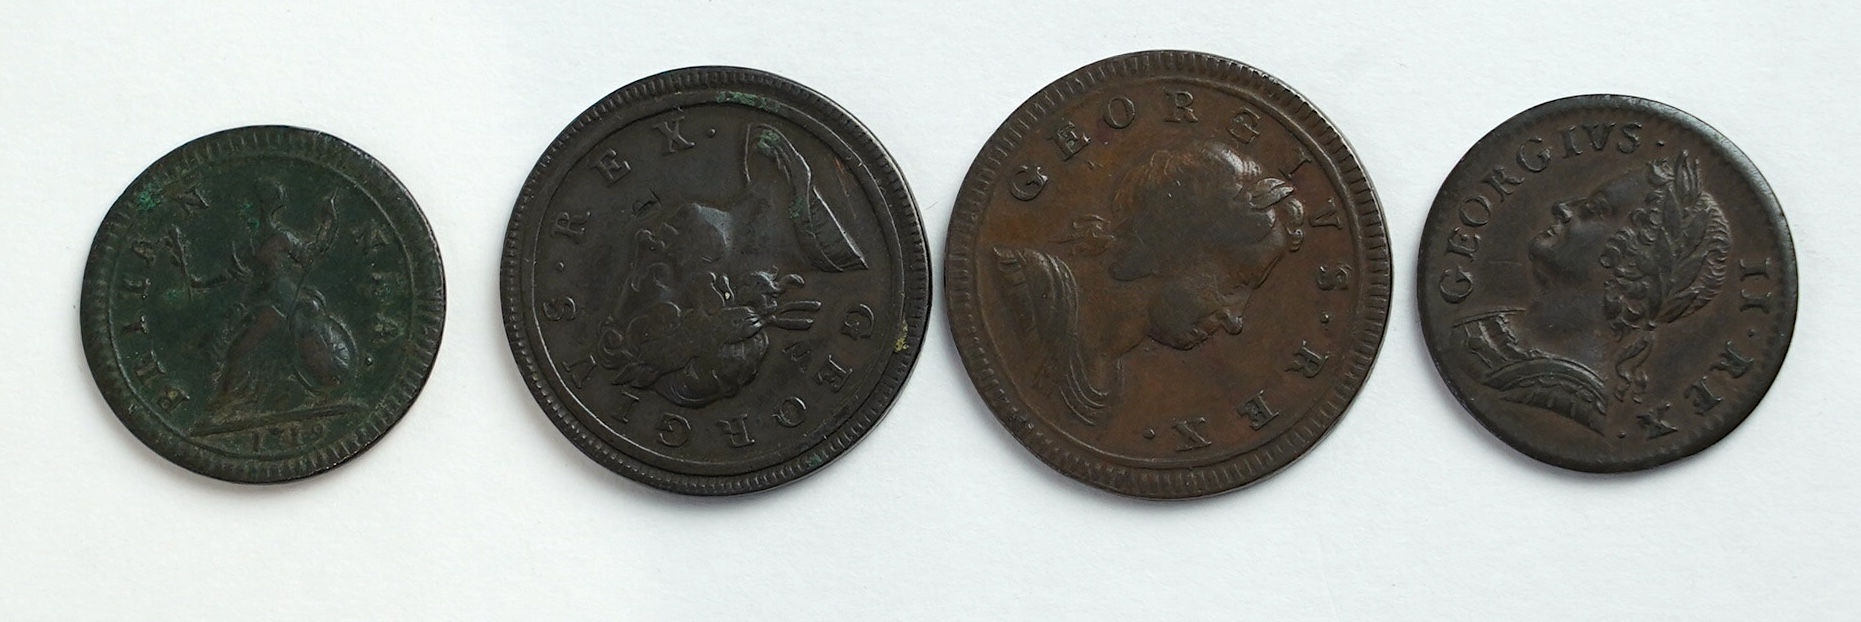 British farthings and halfpennies, Georgian period; two George I halfpenny coins, 1717, graffiti initials each side of portrait bust otherwise fine and 1723, about fine, three George I farthings, including 1719, fine, tw